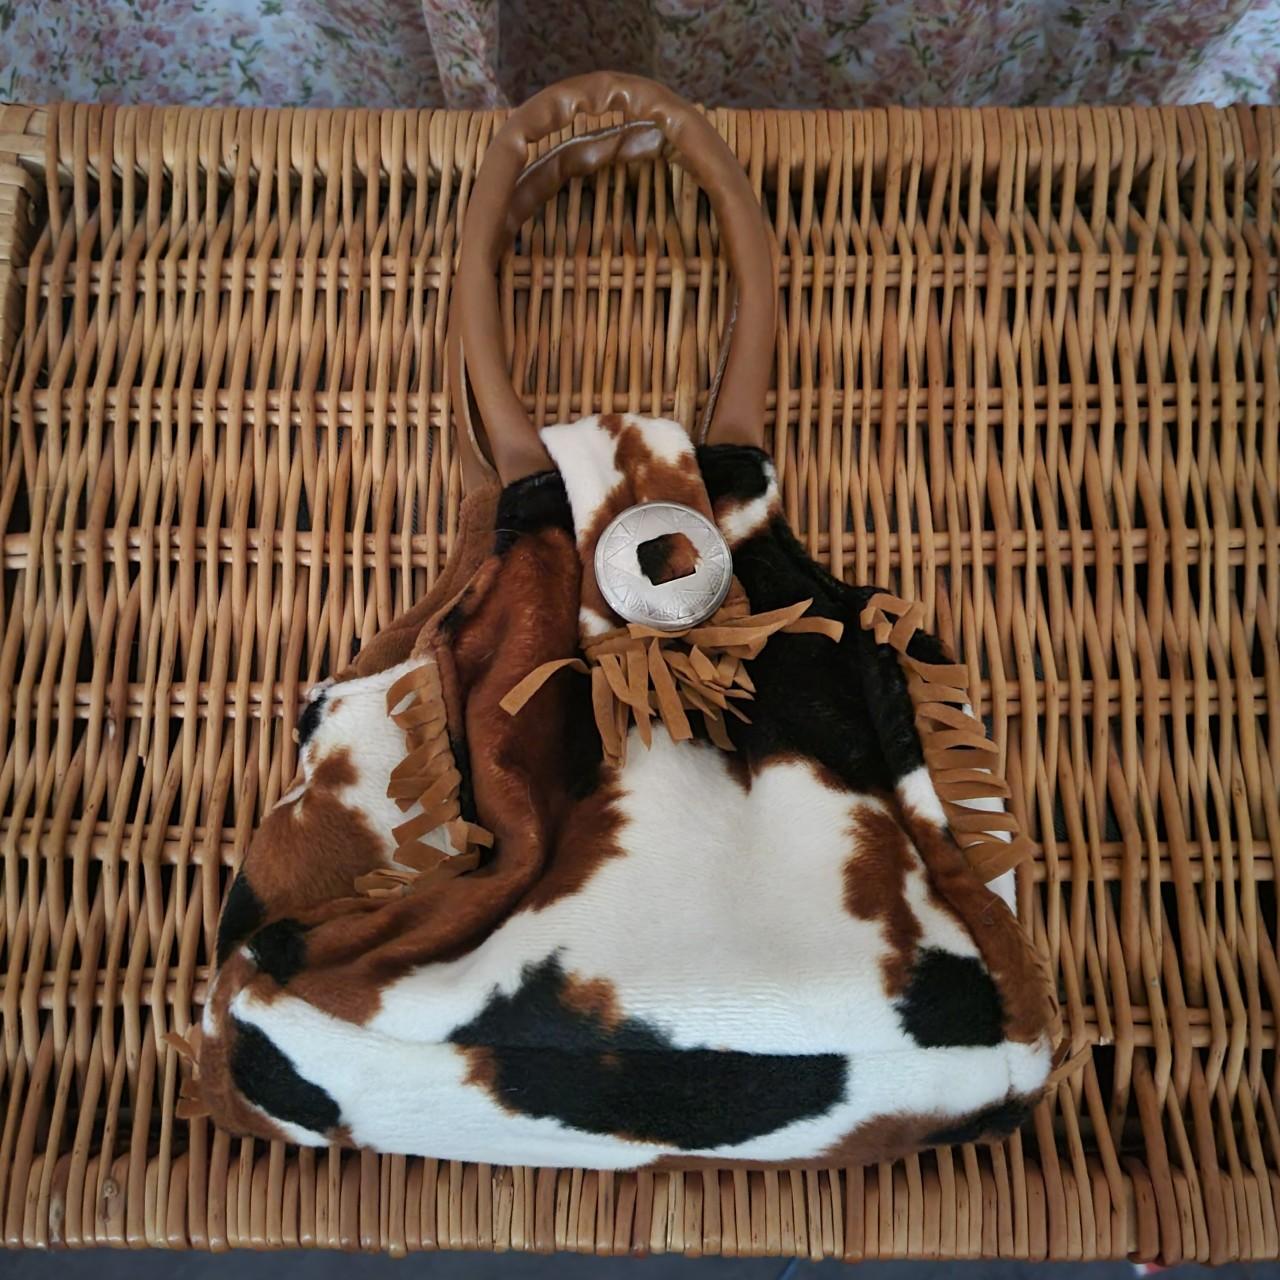 small cow print purse with fringe and a silver - Depop